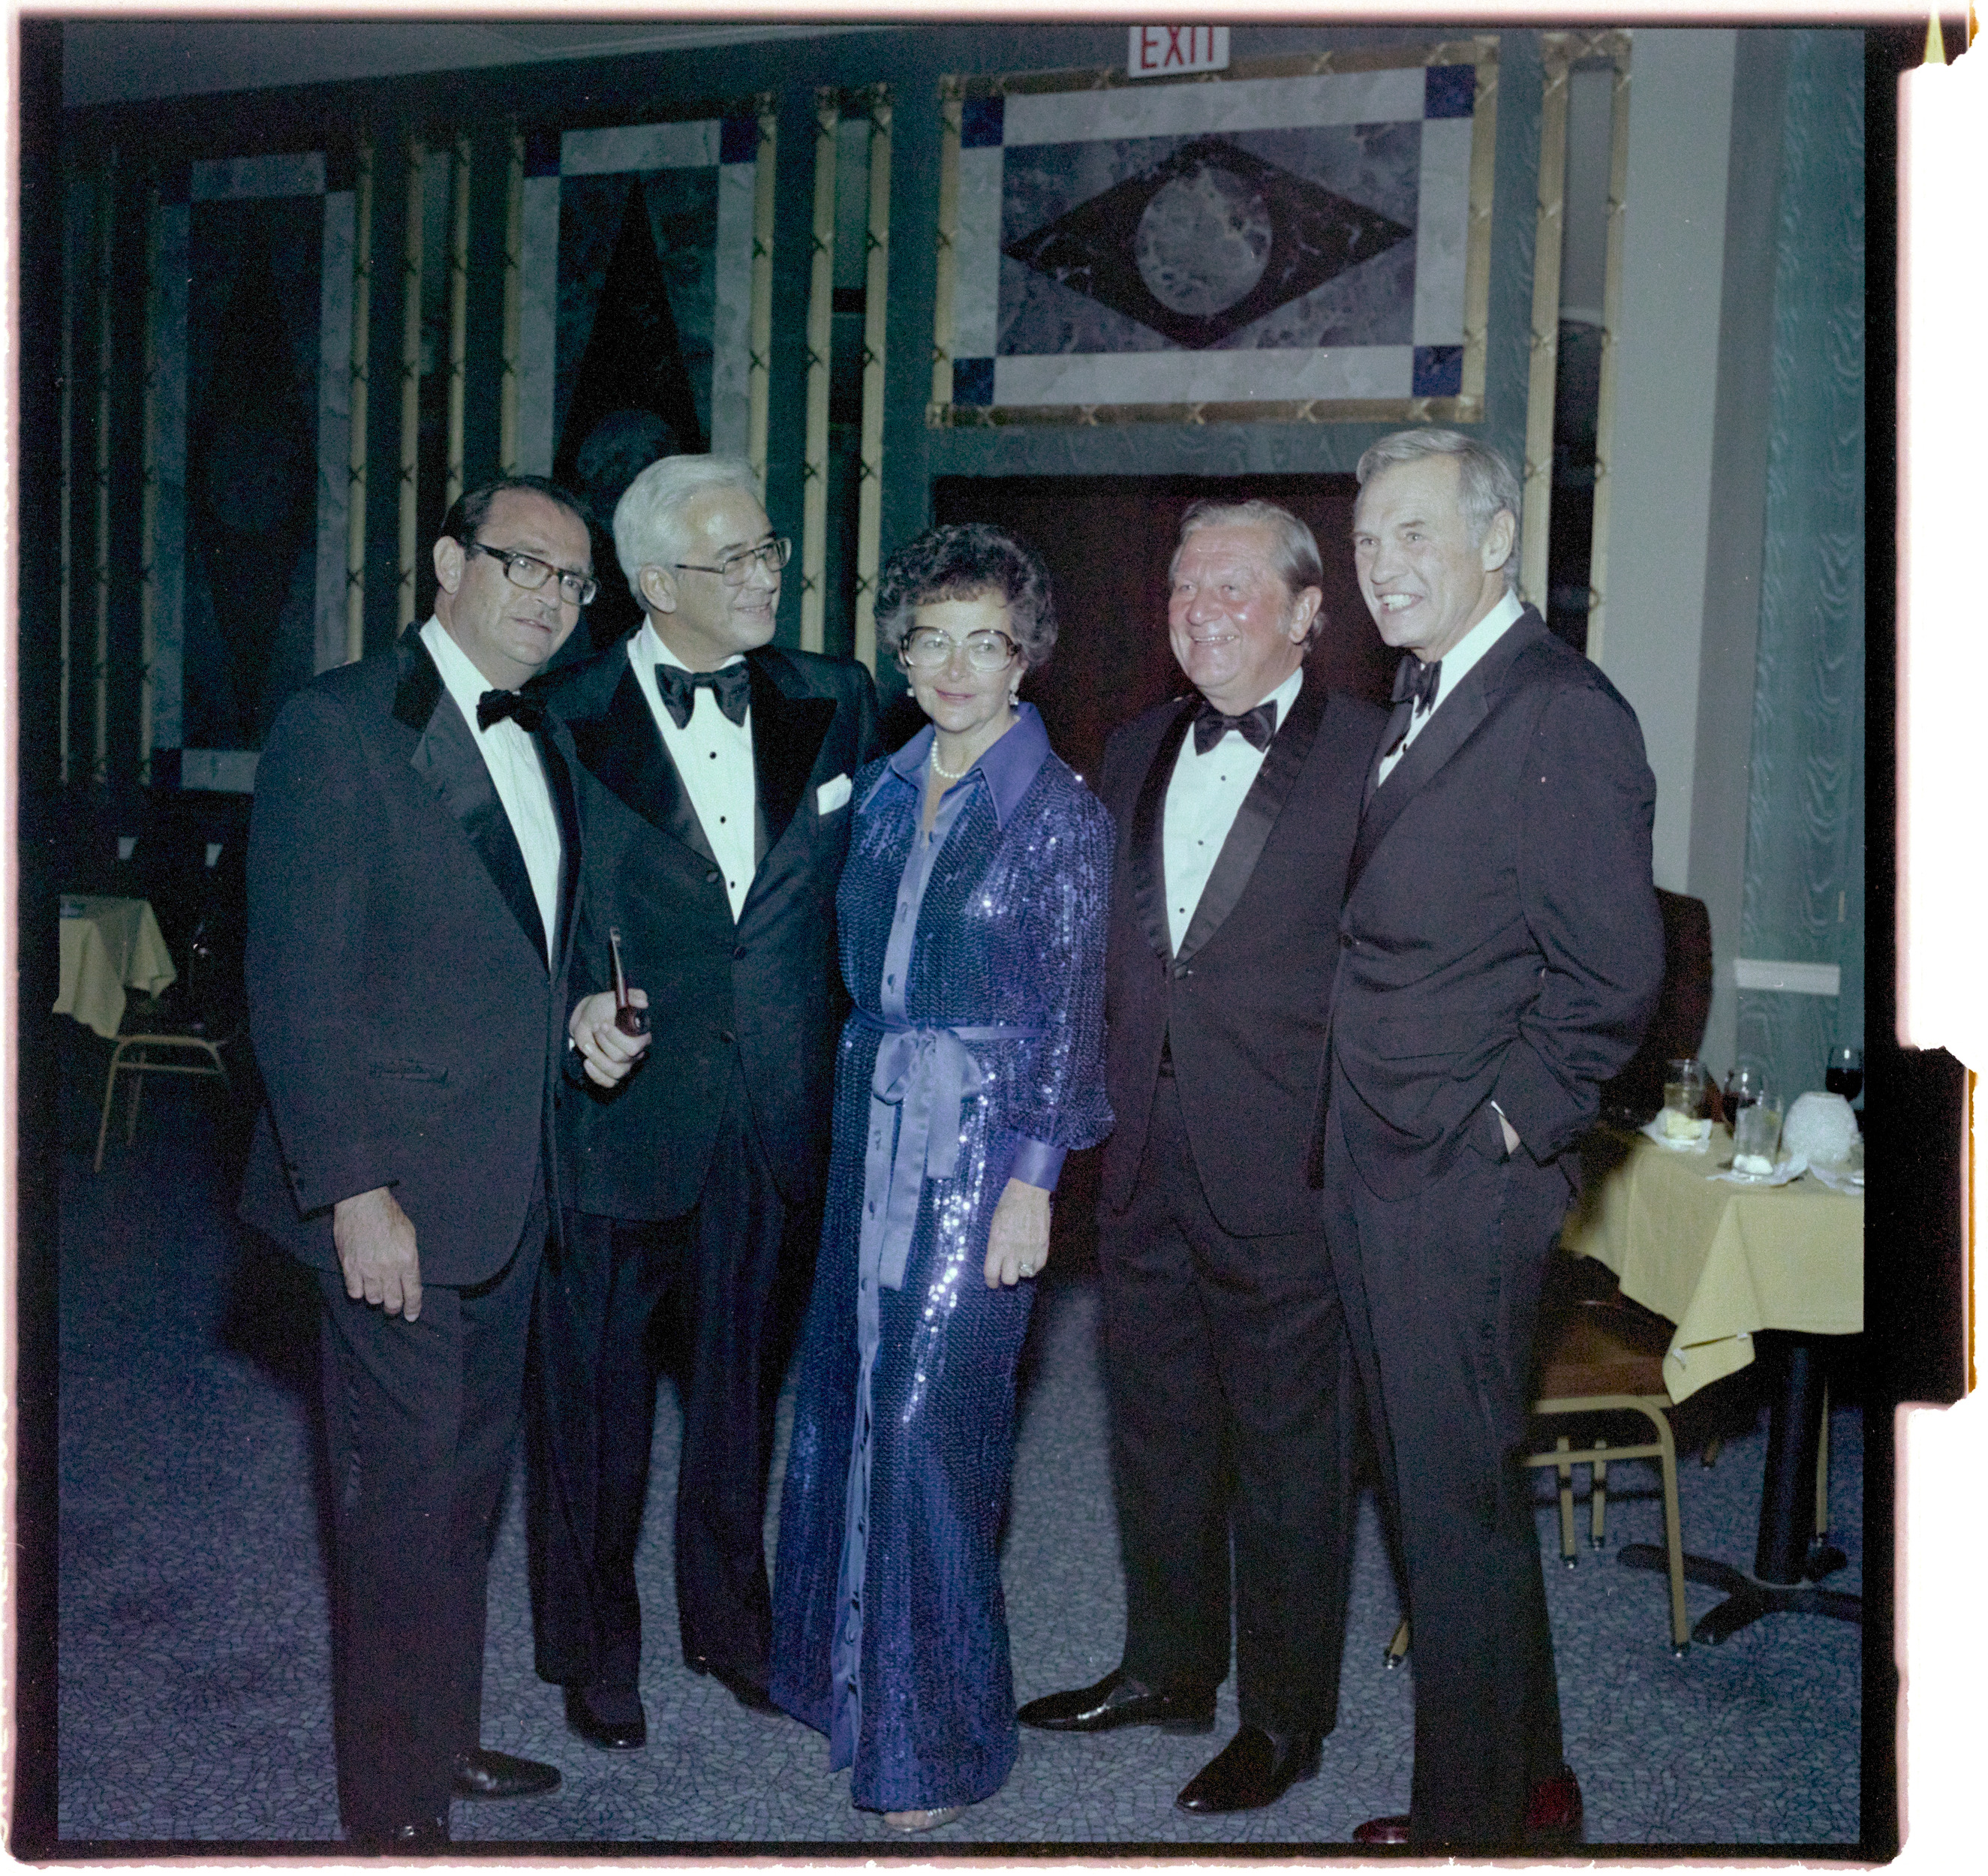 Photographs of Combined Jewish Appeal (Israel Bonds Dinner), image 07